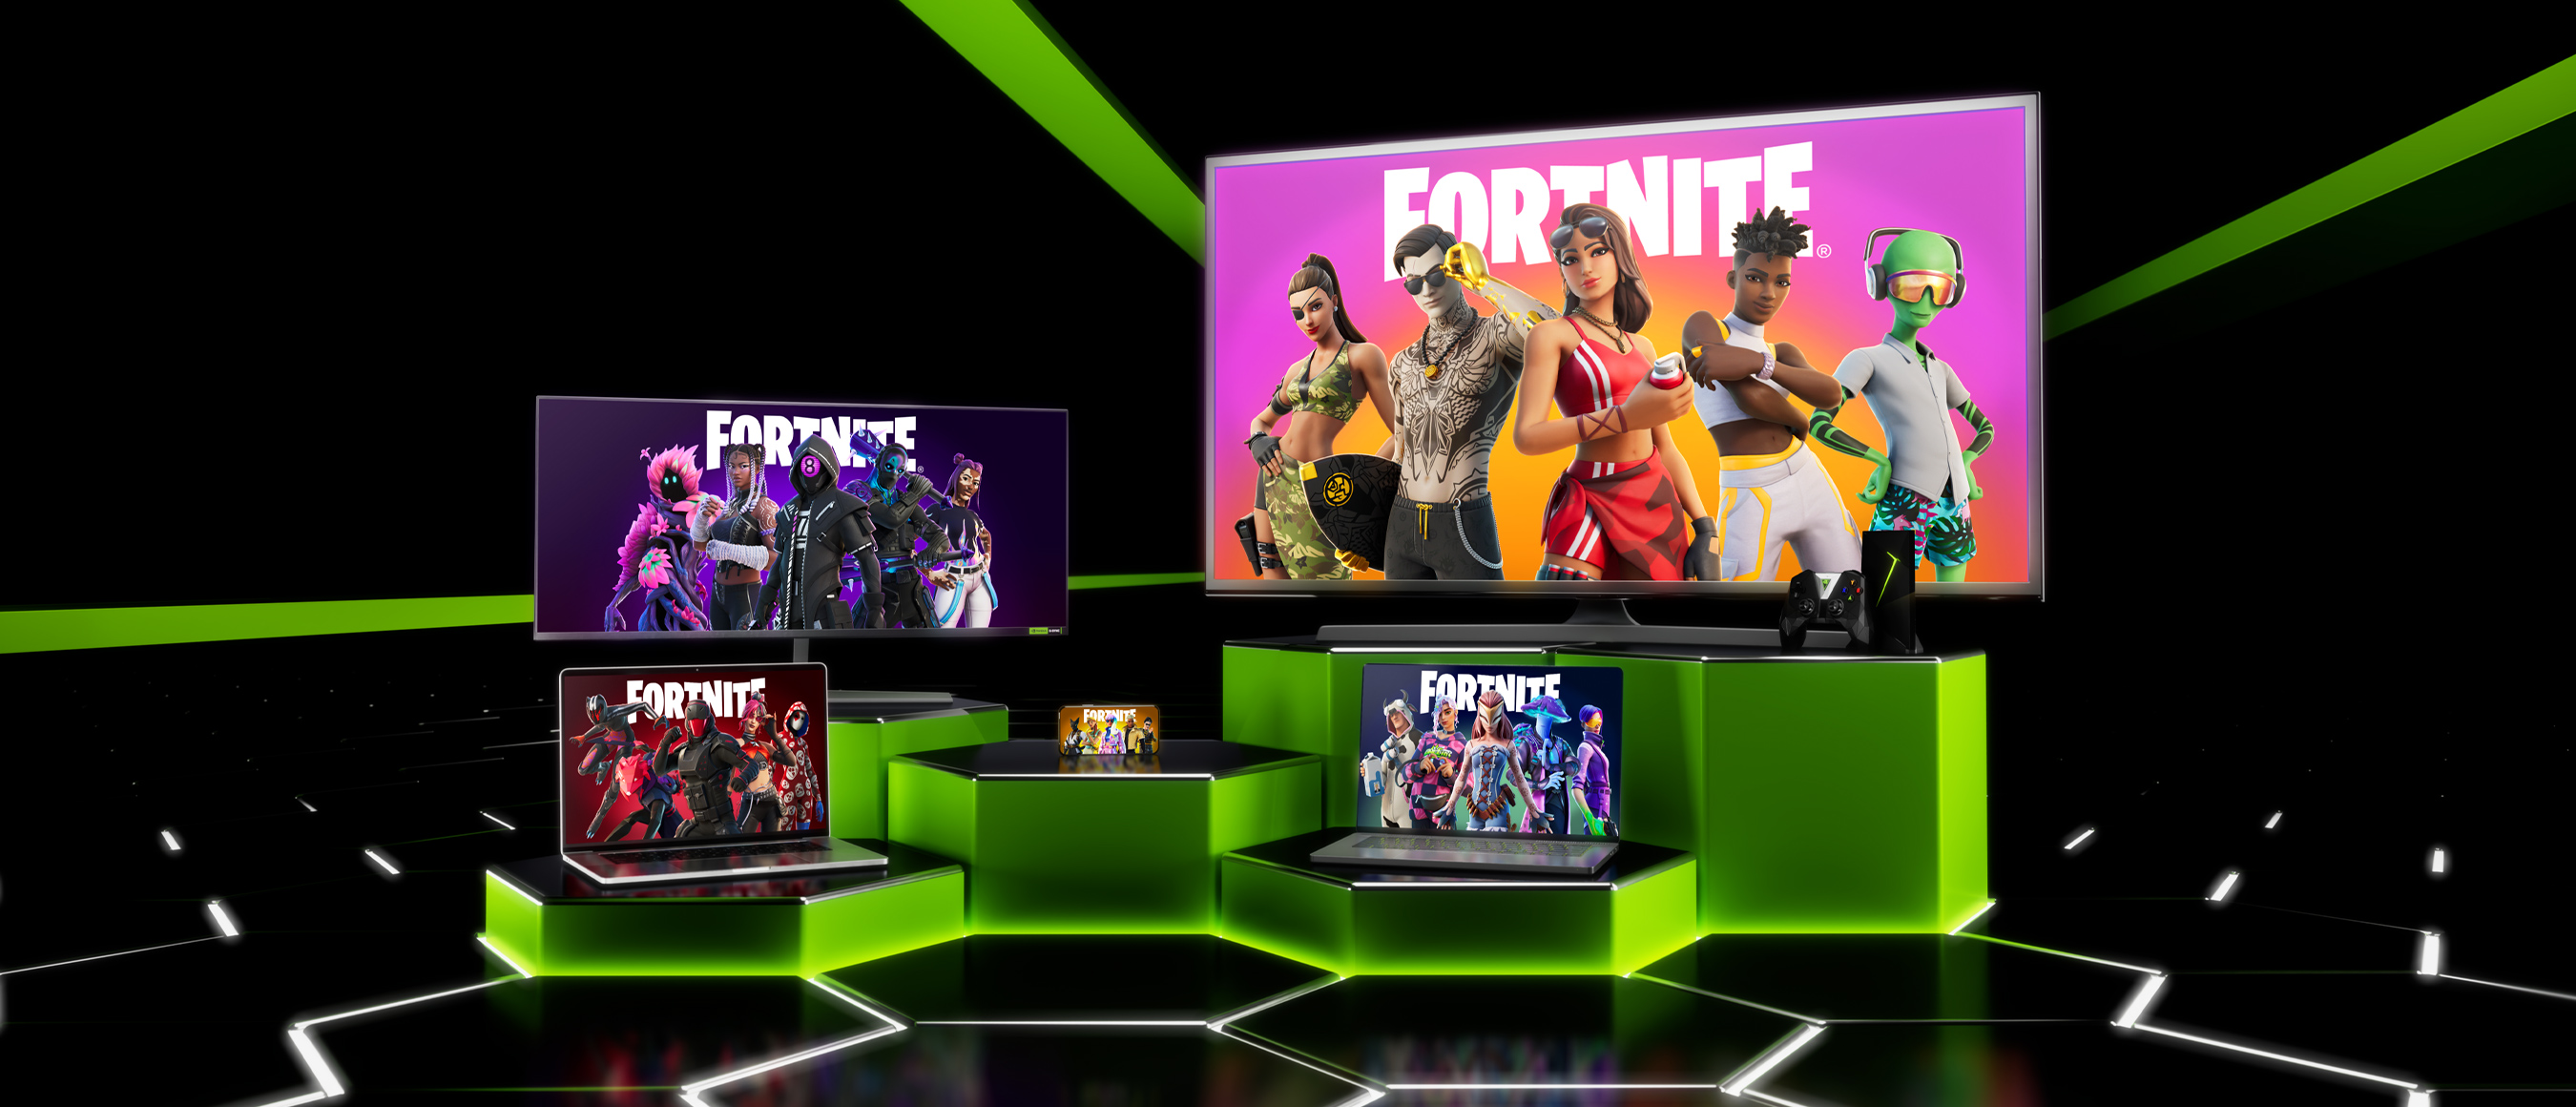 Fortnite: How to play popular game on GeForce Now and Xbox Cloud